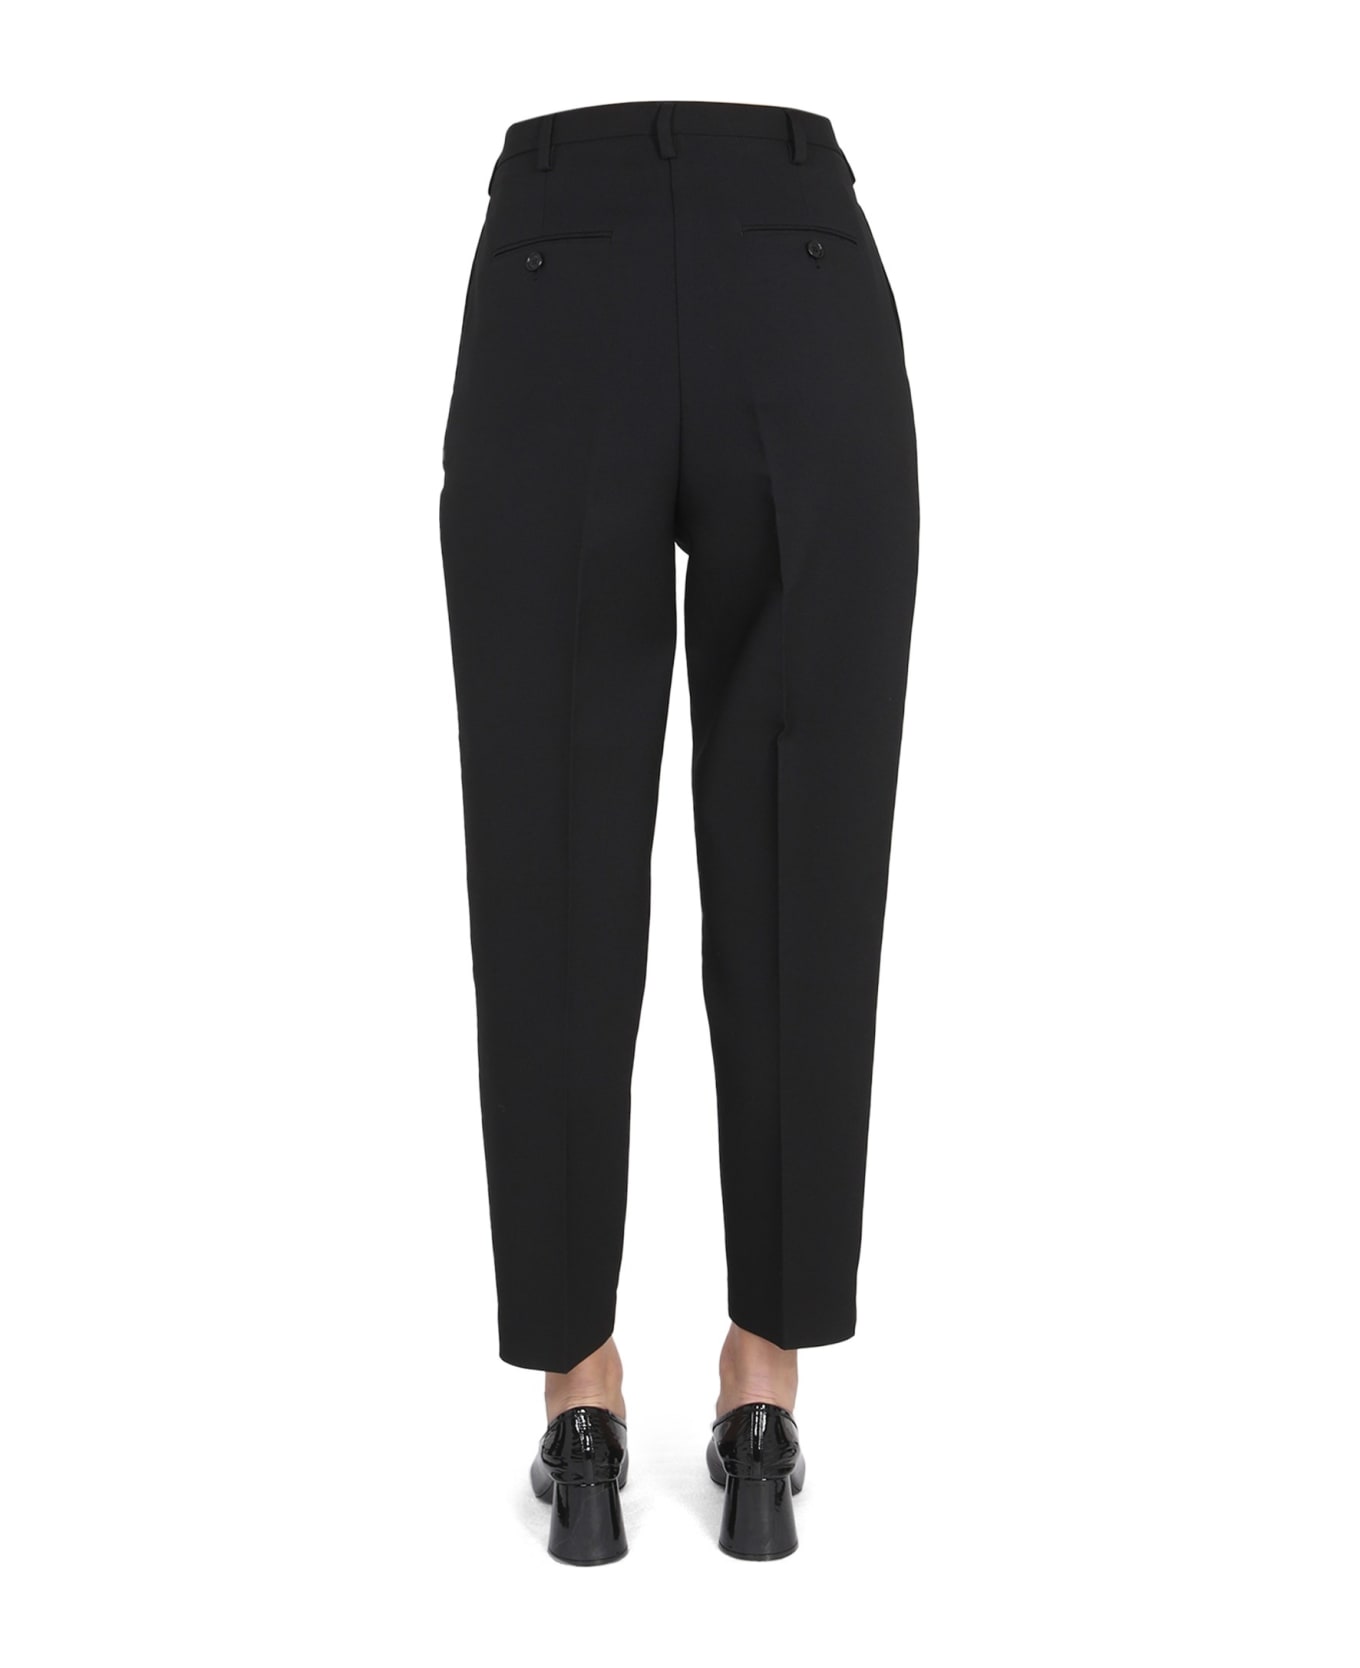 Department Five Cropped Pants - NERO